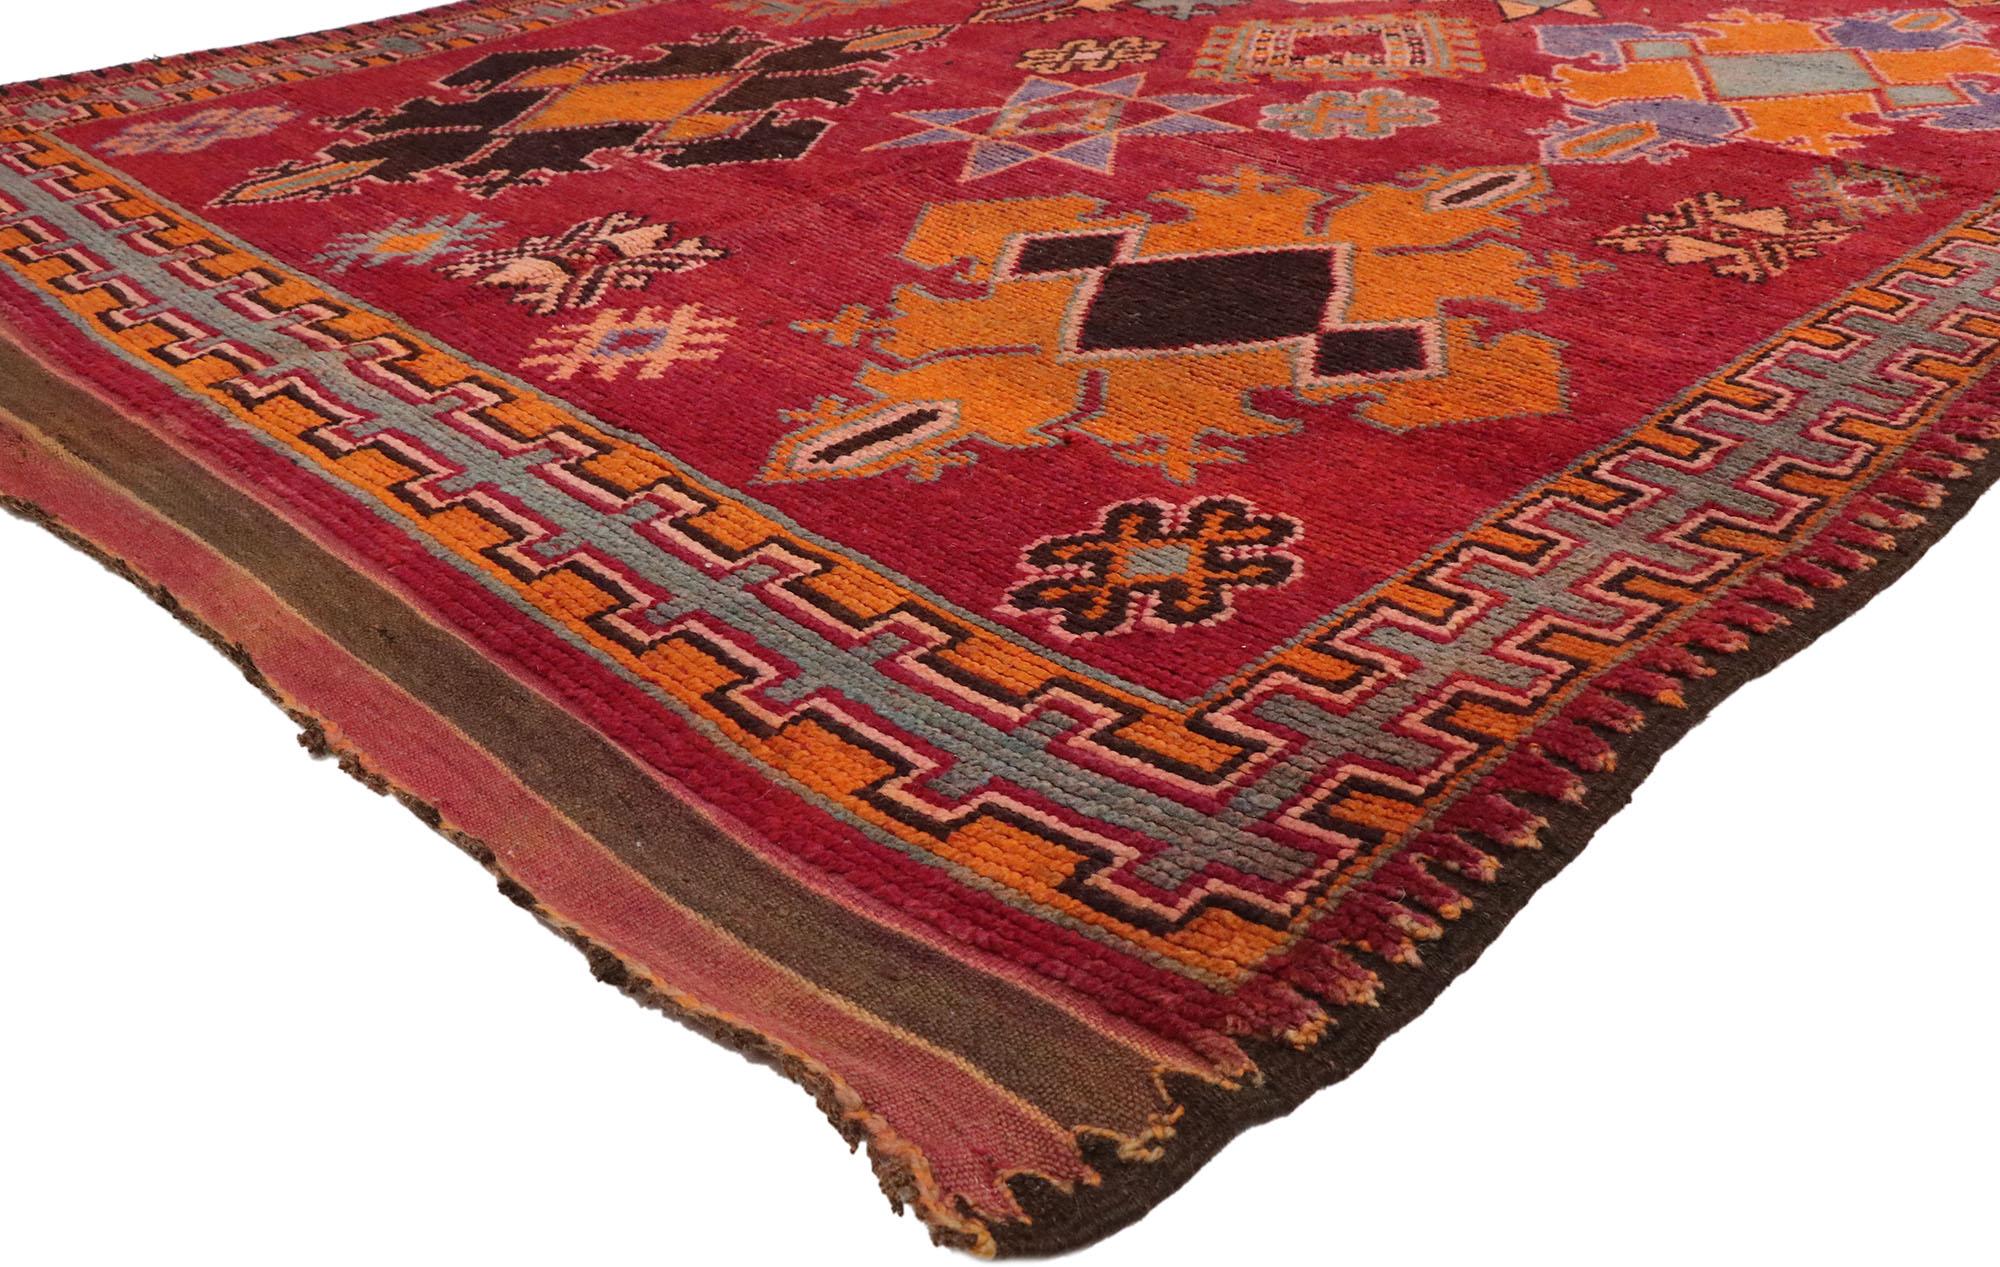 20190 Vintage Red Boujad Moroccan Rug, 06'06 x 14'08. A Boujad rug is a traditional Moroccan handwoven rug crafted by Berber artisans from the Zemmour tribe in the Haouz region near the town of Boujad in the Middle Atlas Mountains. These rugs are